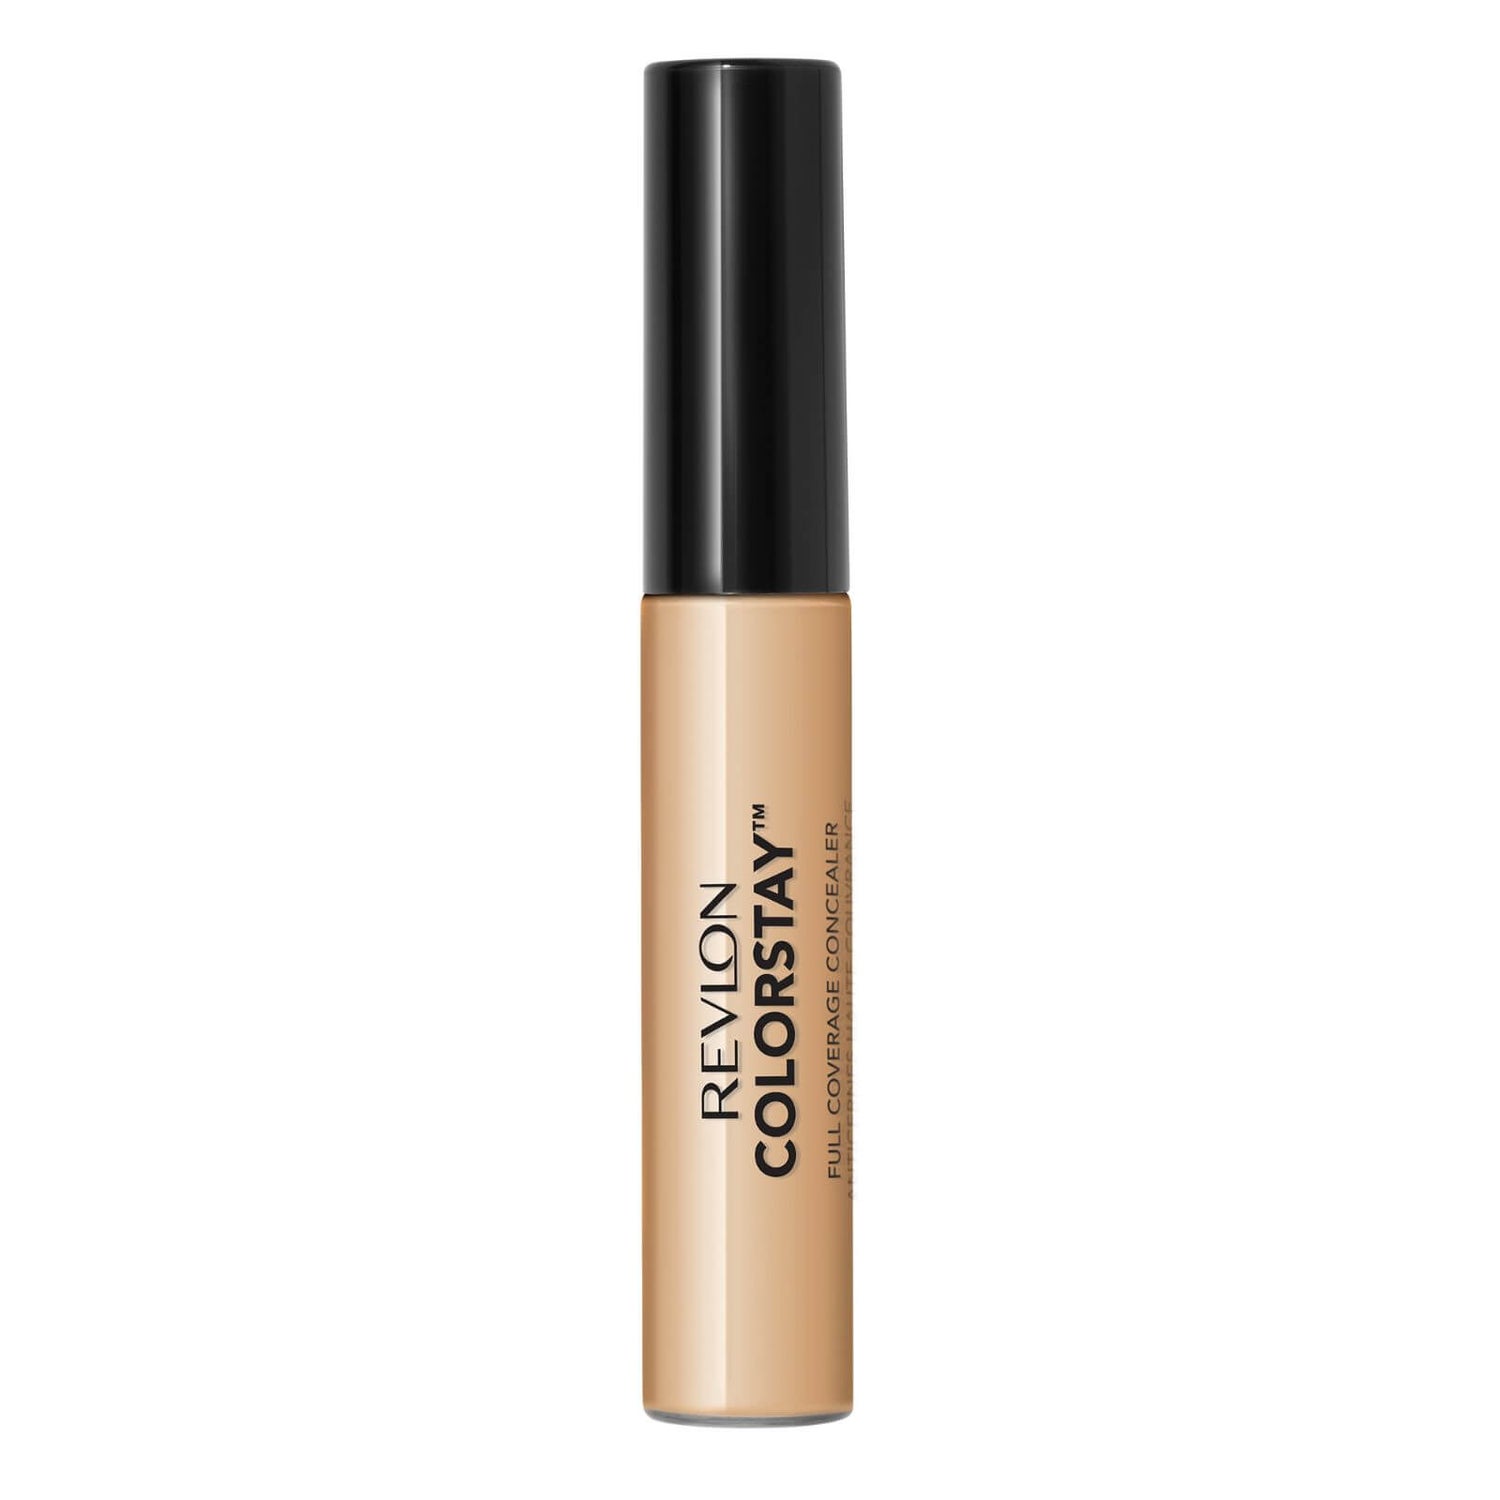 Revlon Colorstay Concealer (Various Shades)